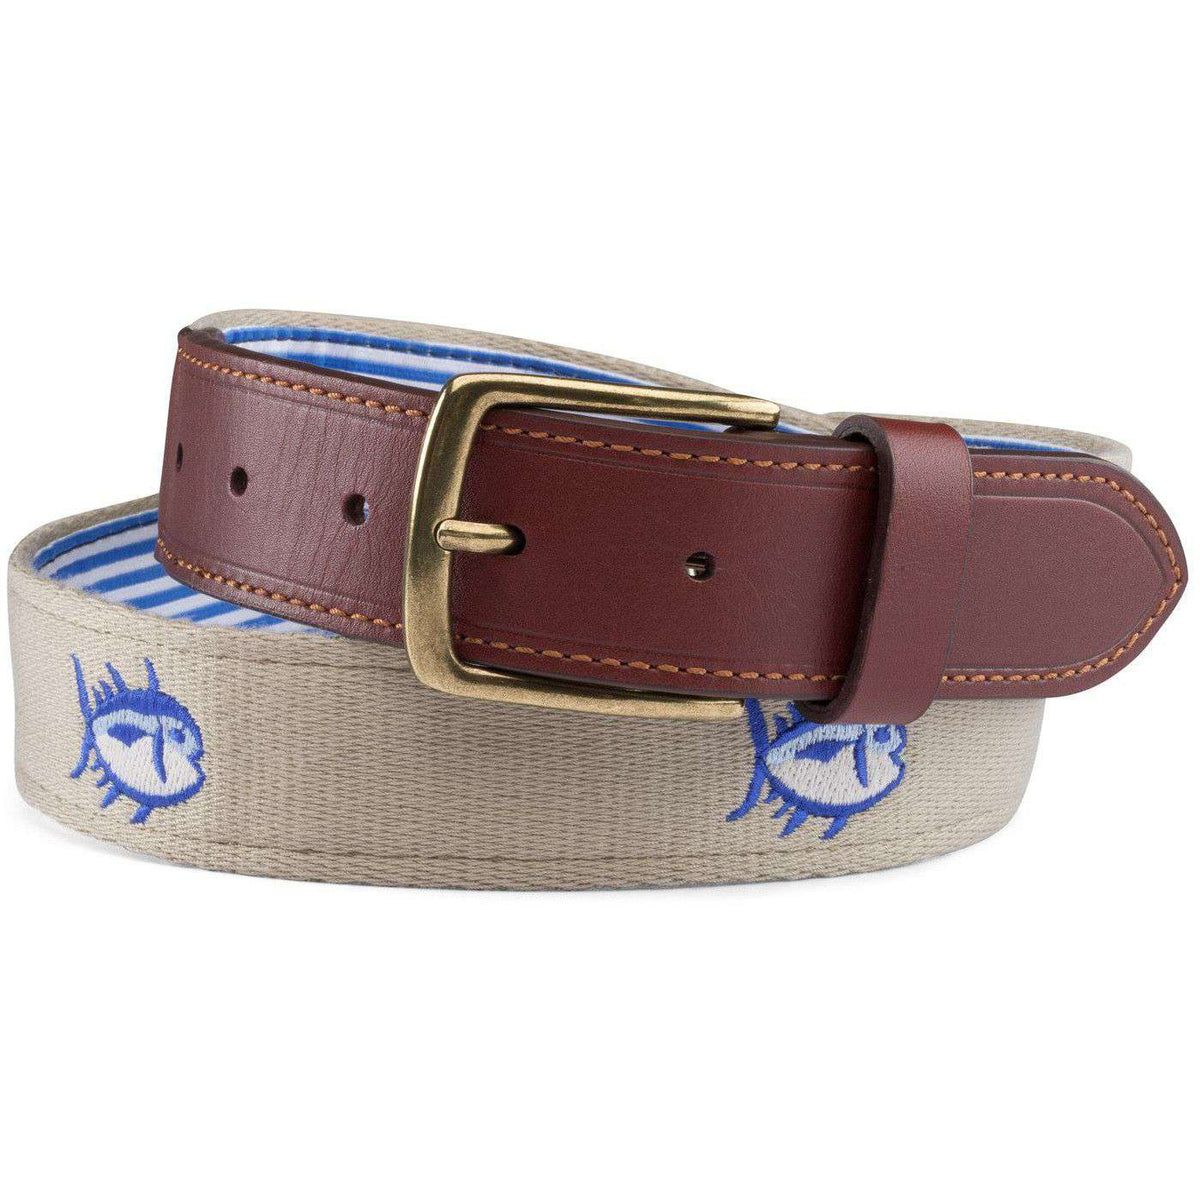 Embroidered Skipjack Belt in Sandstone Khaki by Southern Tide - Country Club Prep